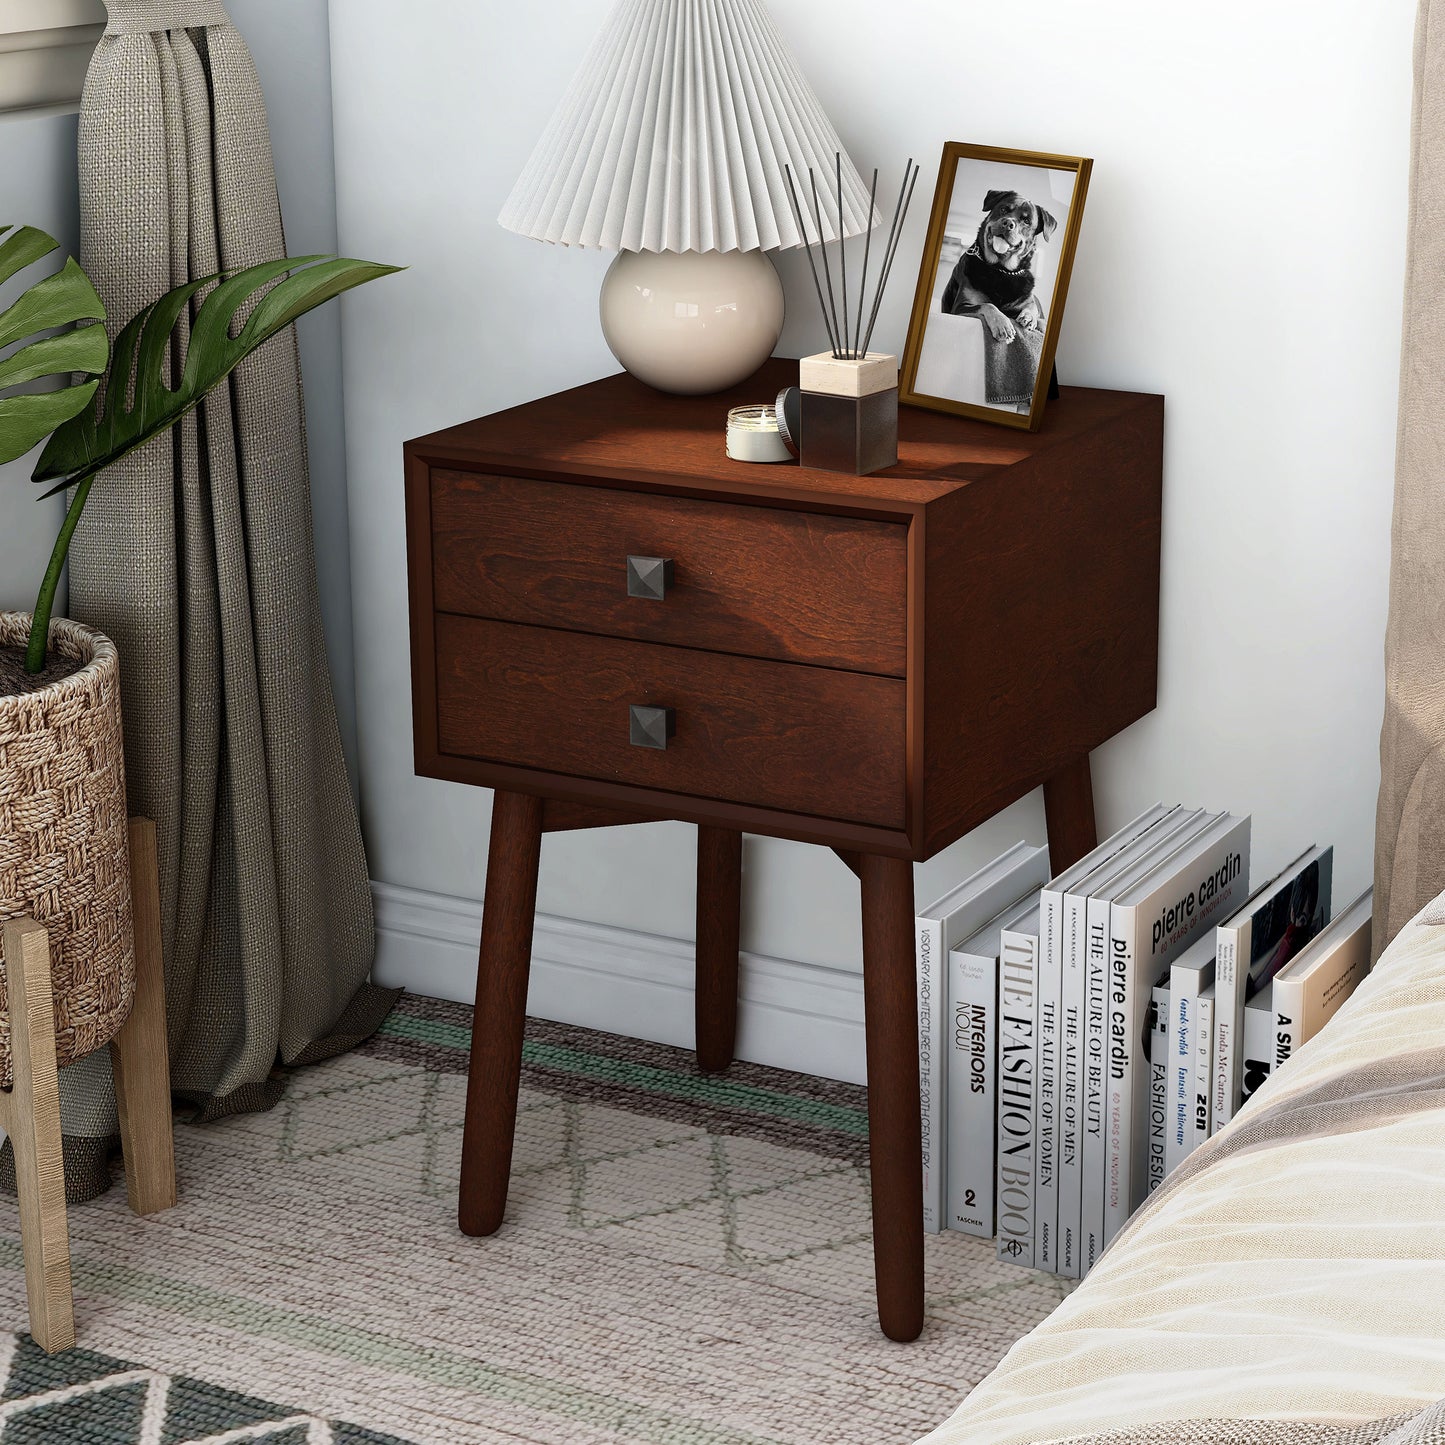 Left angled modern espresso two-drawer compact nightstand with splayed legs in a bedroom with accessories